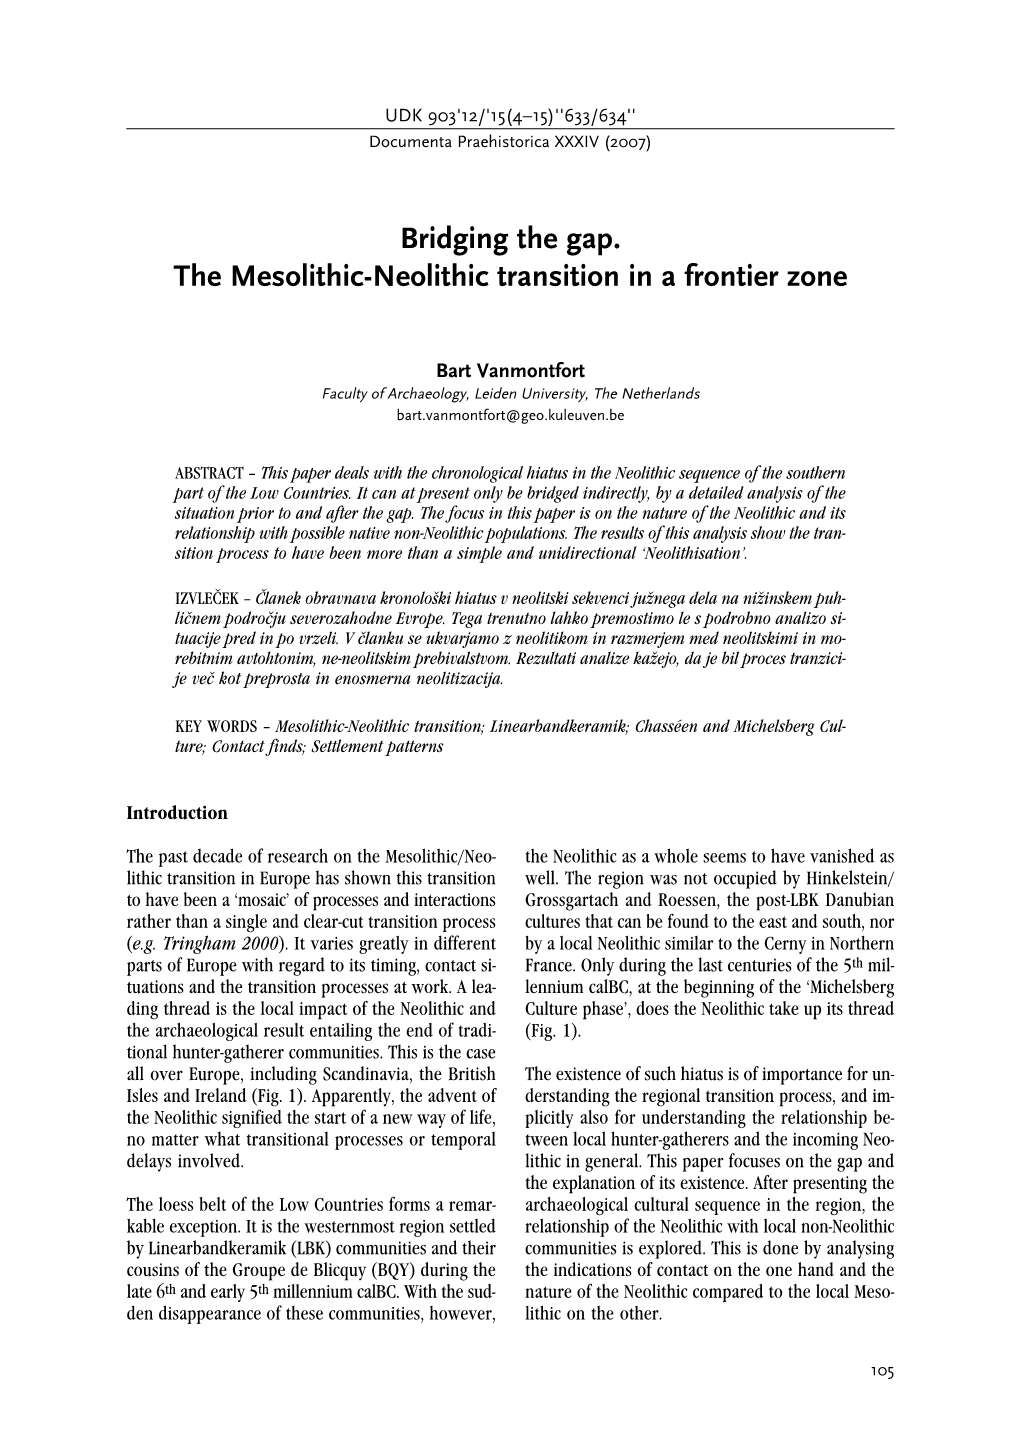 Bridging the Gap. the Mesolithic-Neolithic Transition in a Frontier Zone